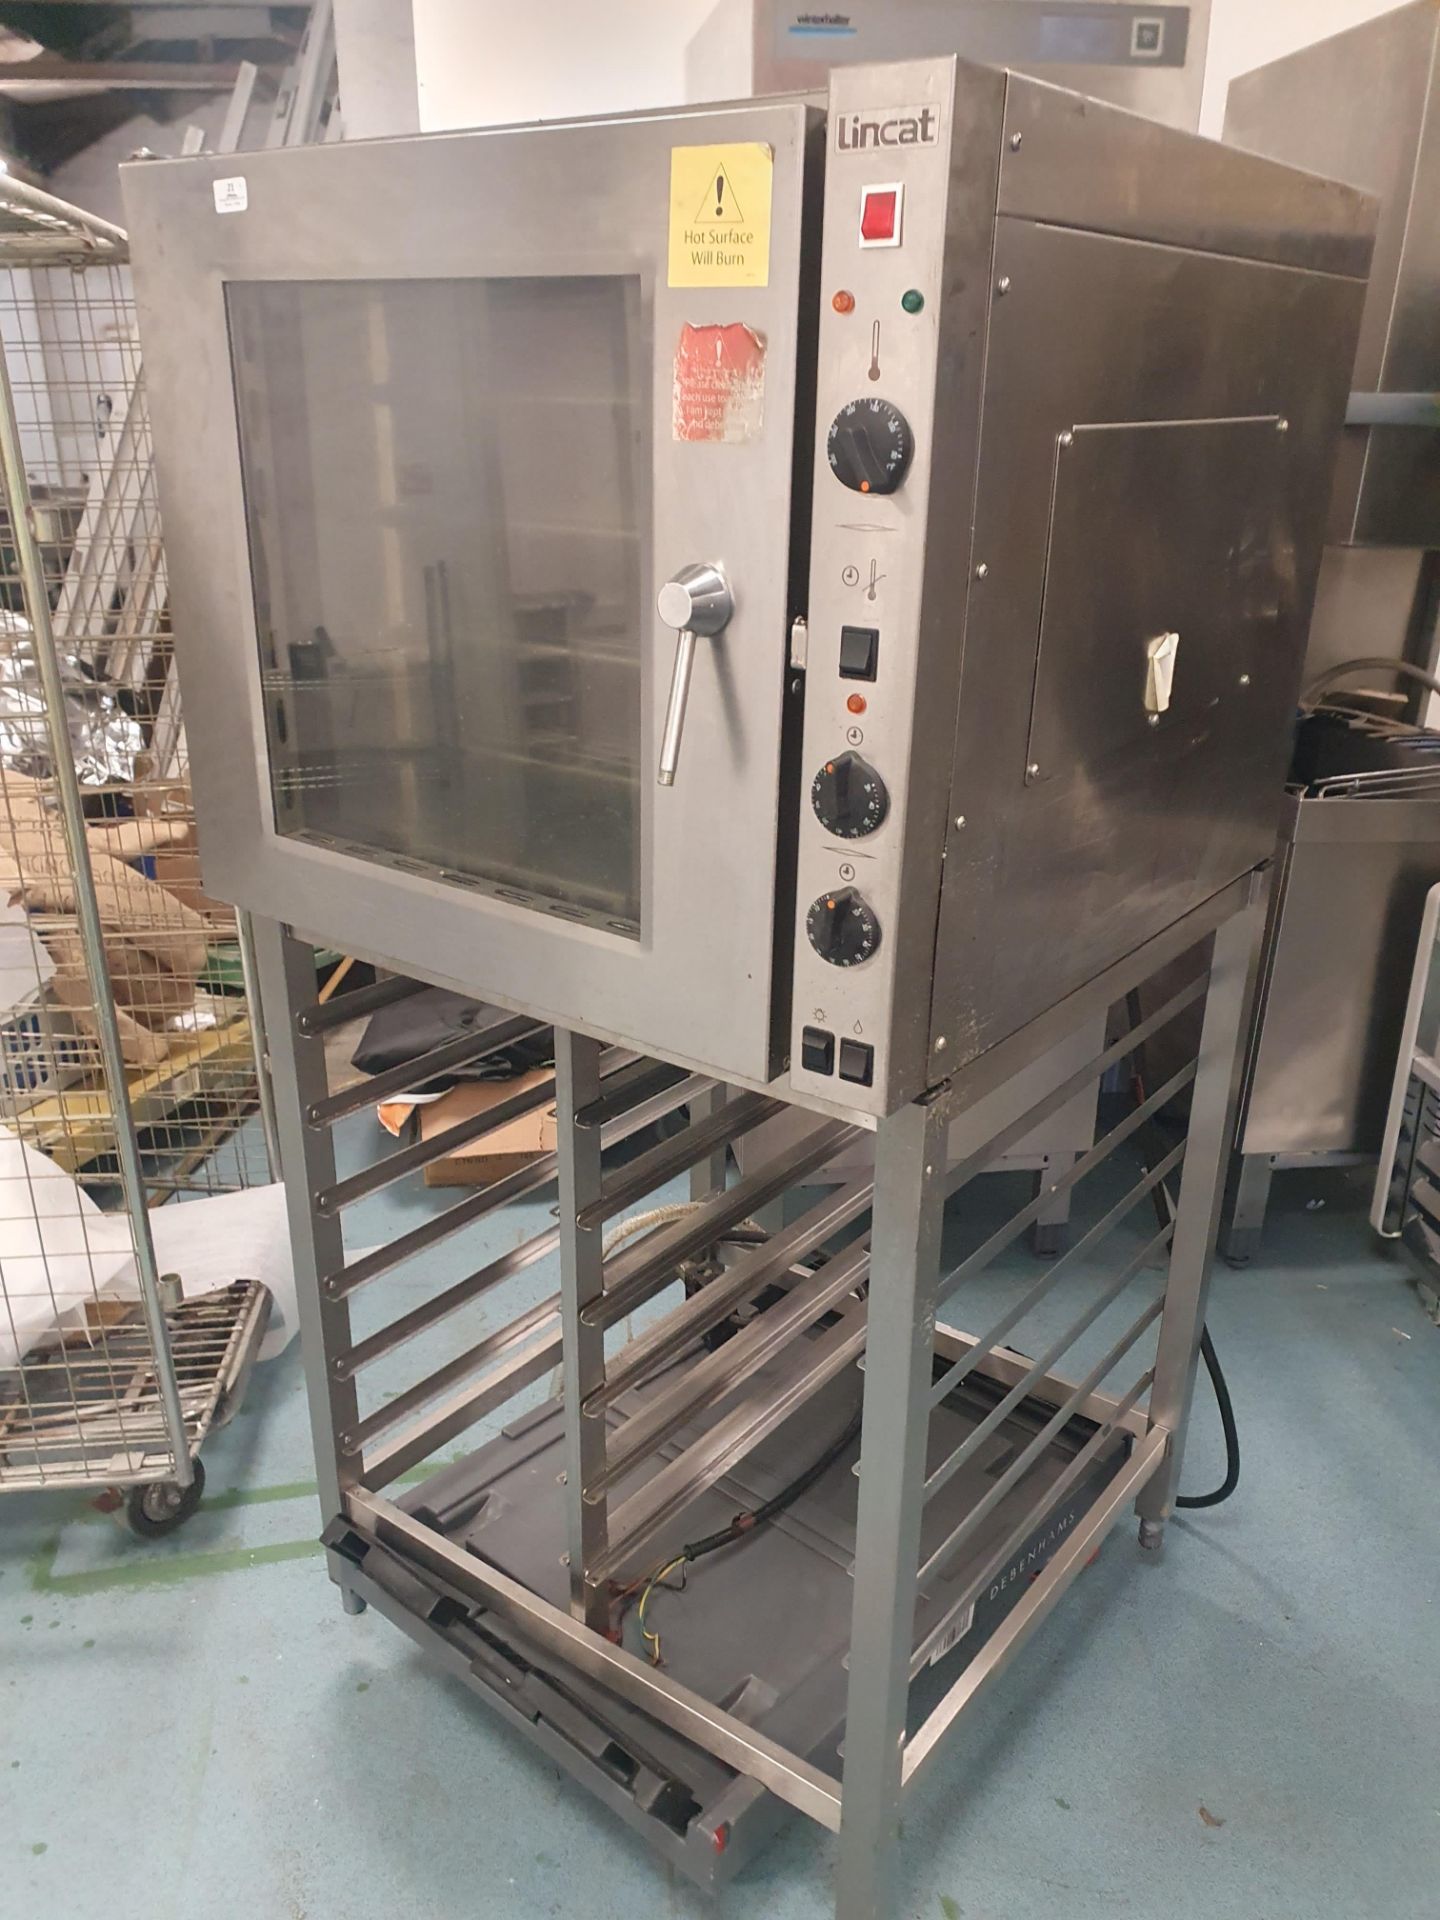 * Lincat Eco9 convection oven on stand